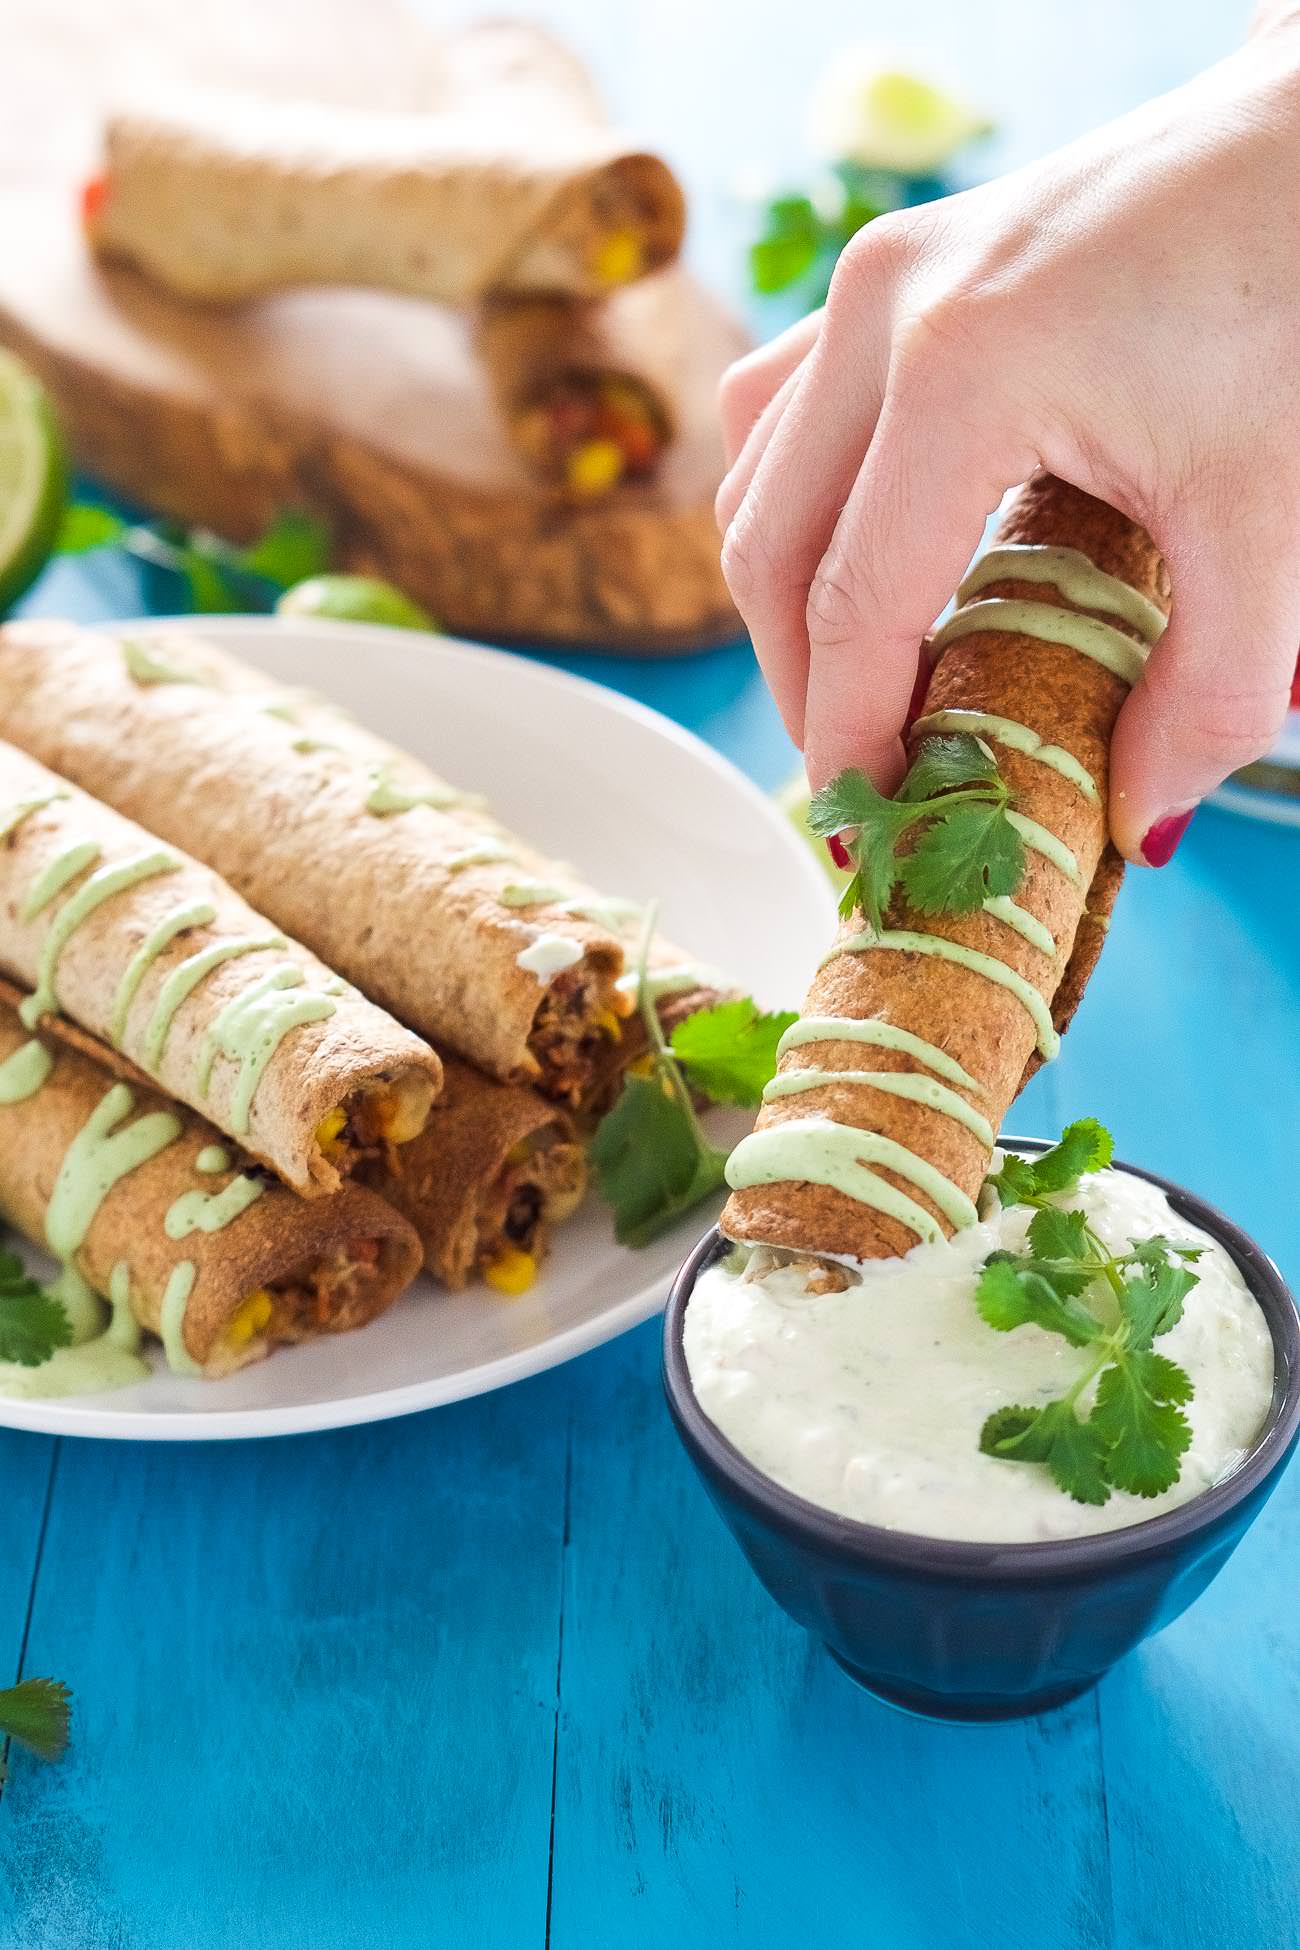 Cheesy Firecracker Baked Chicken Taquitos are a healthier alternative to their store bought sidekicks! Filled with gooey, spicy cheese, corn, chicken and peppers, they are super crispy thanks to a quick bake in the oven!